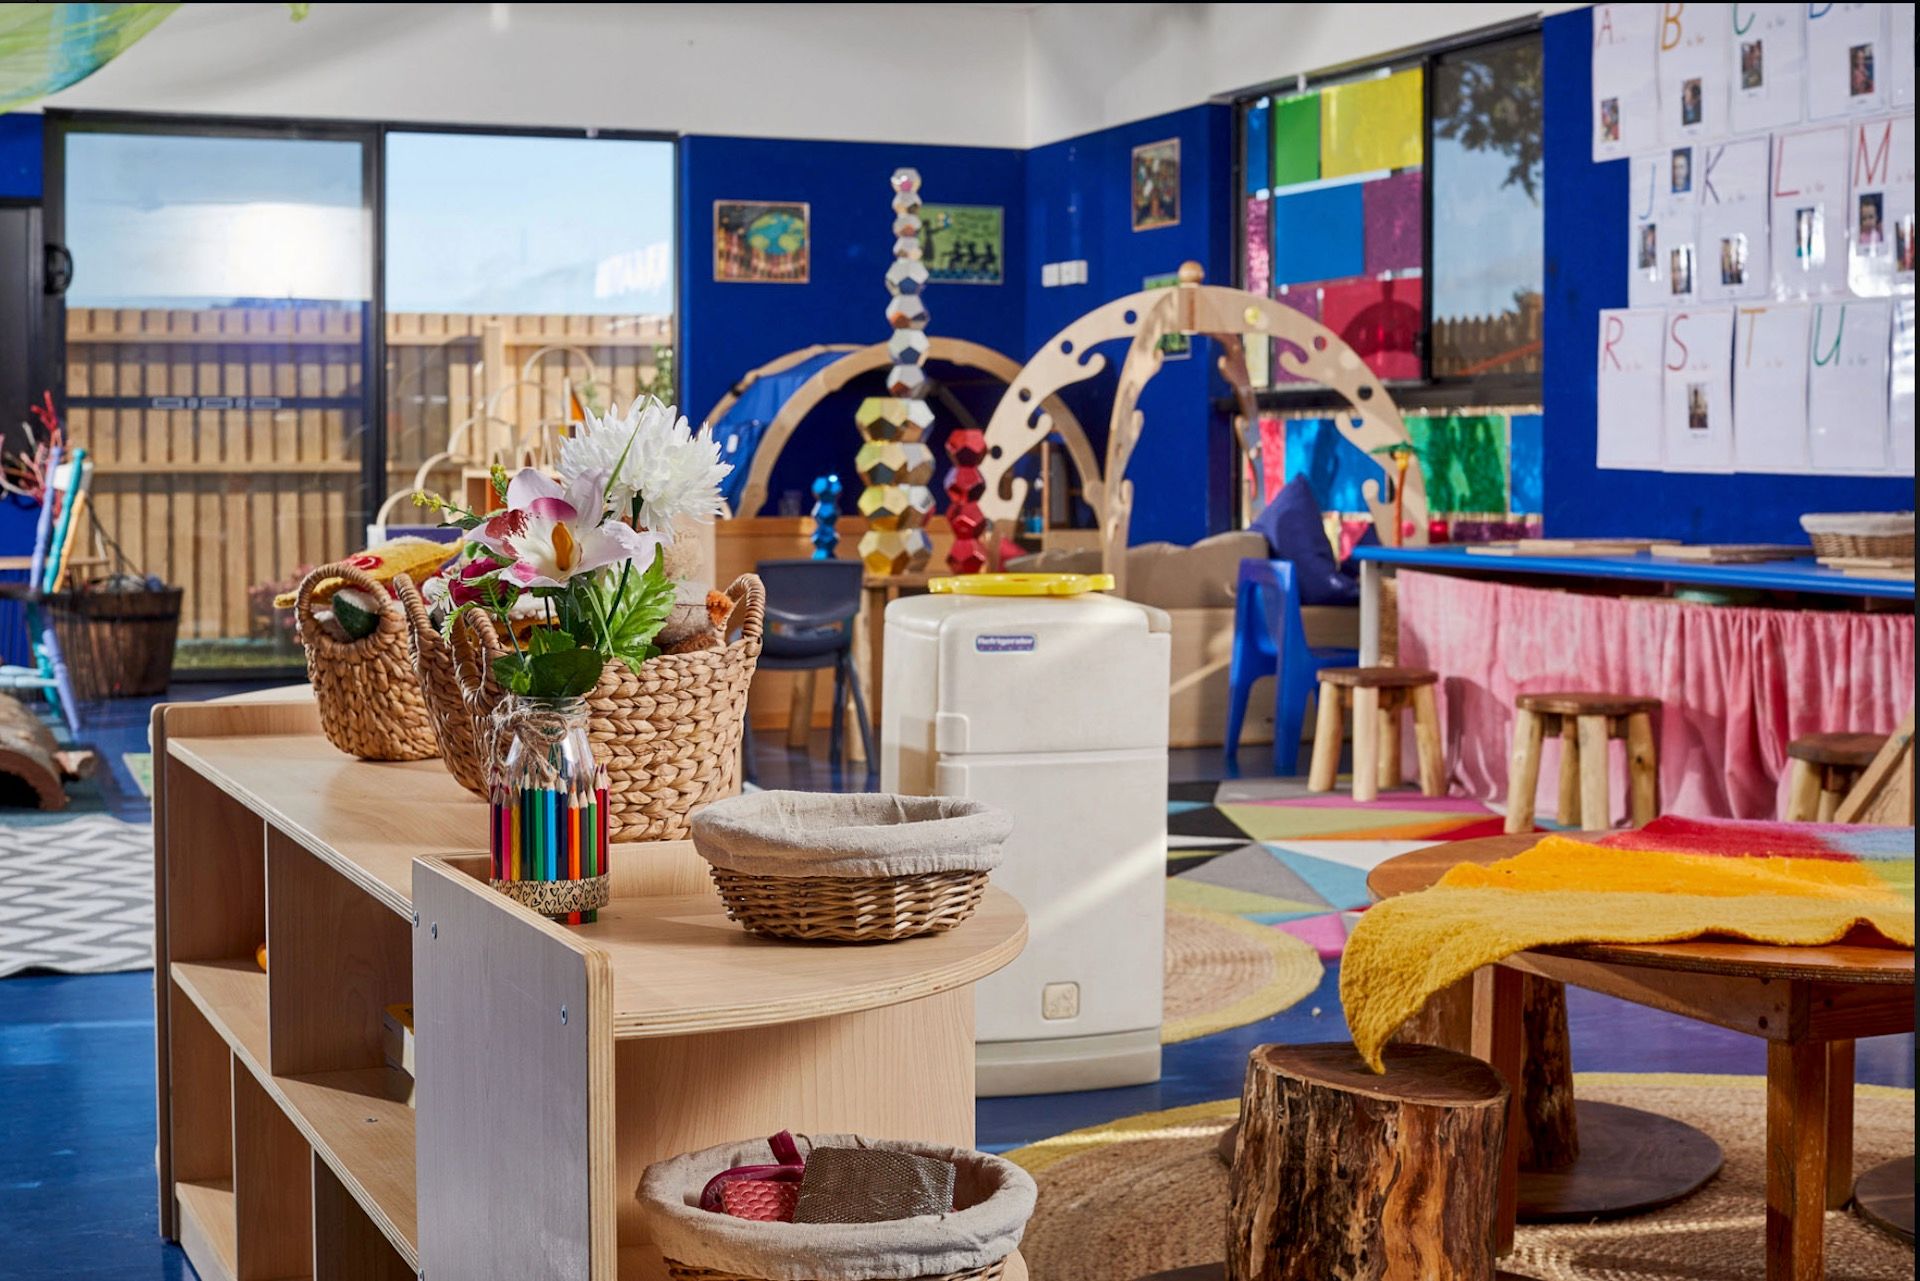 A bright and colourful classroom